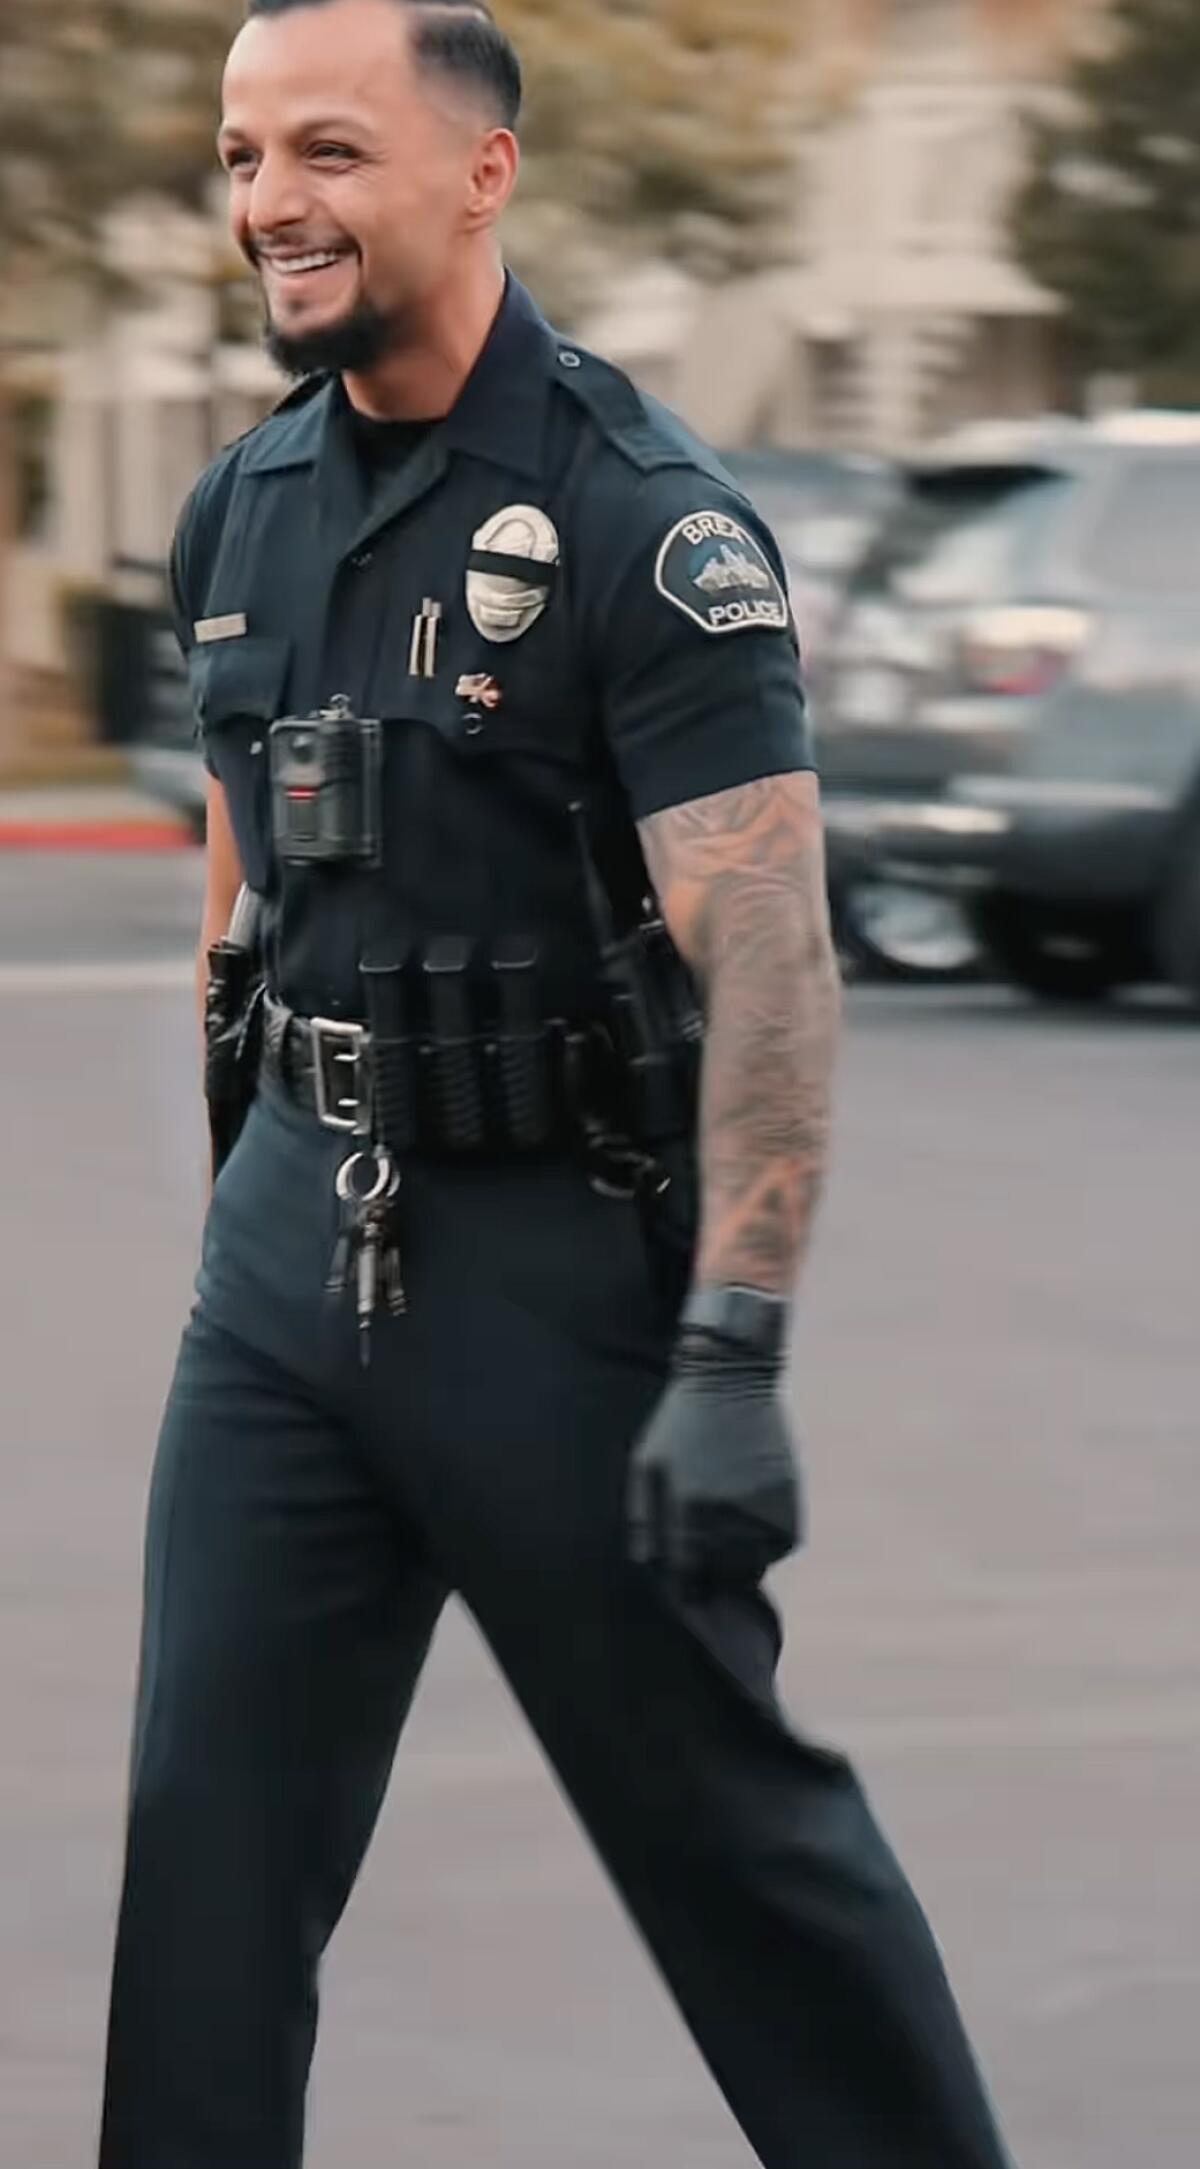 A police officer with visible tattoos on his left arm. 